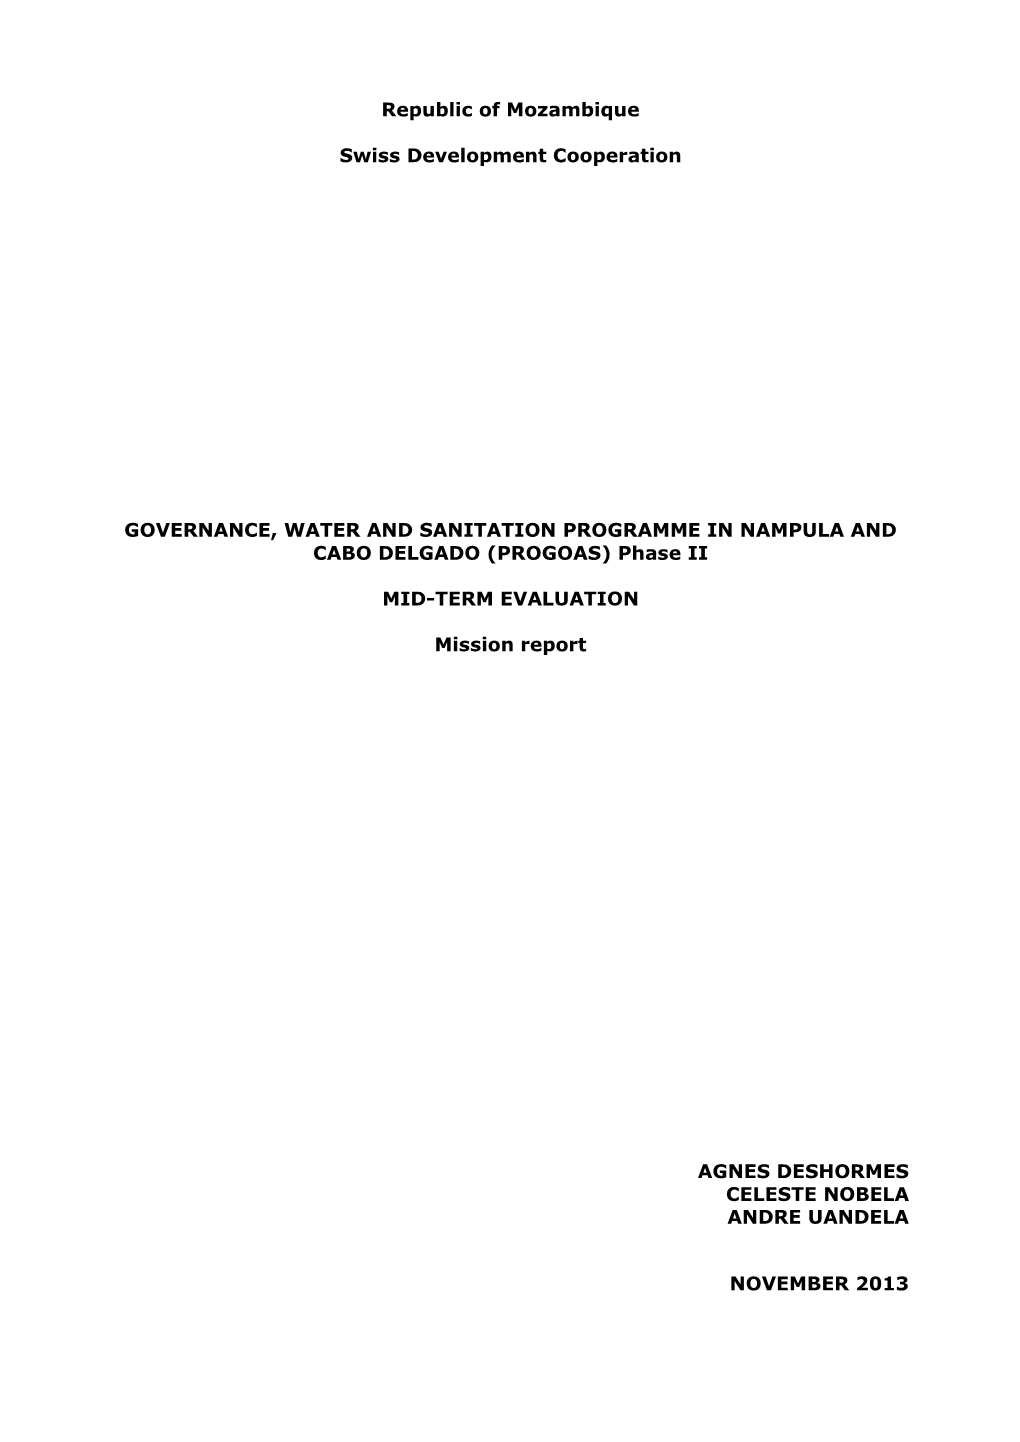 Republic of Mozambique Swiss Development Cooperation GOVERNANCE, WATER and SANITATION PROGRAMME in NAMPULA and CABO DELGADO